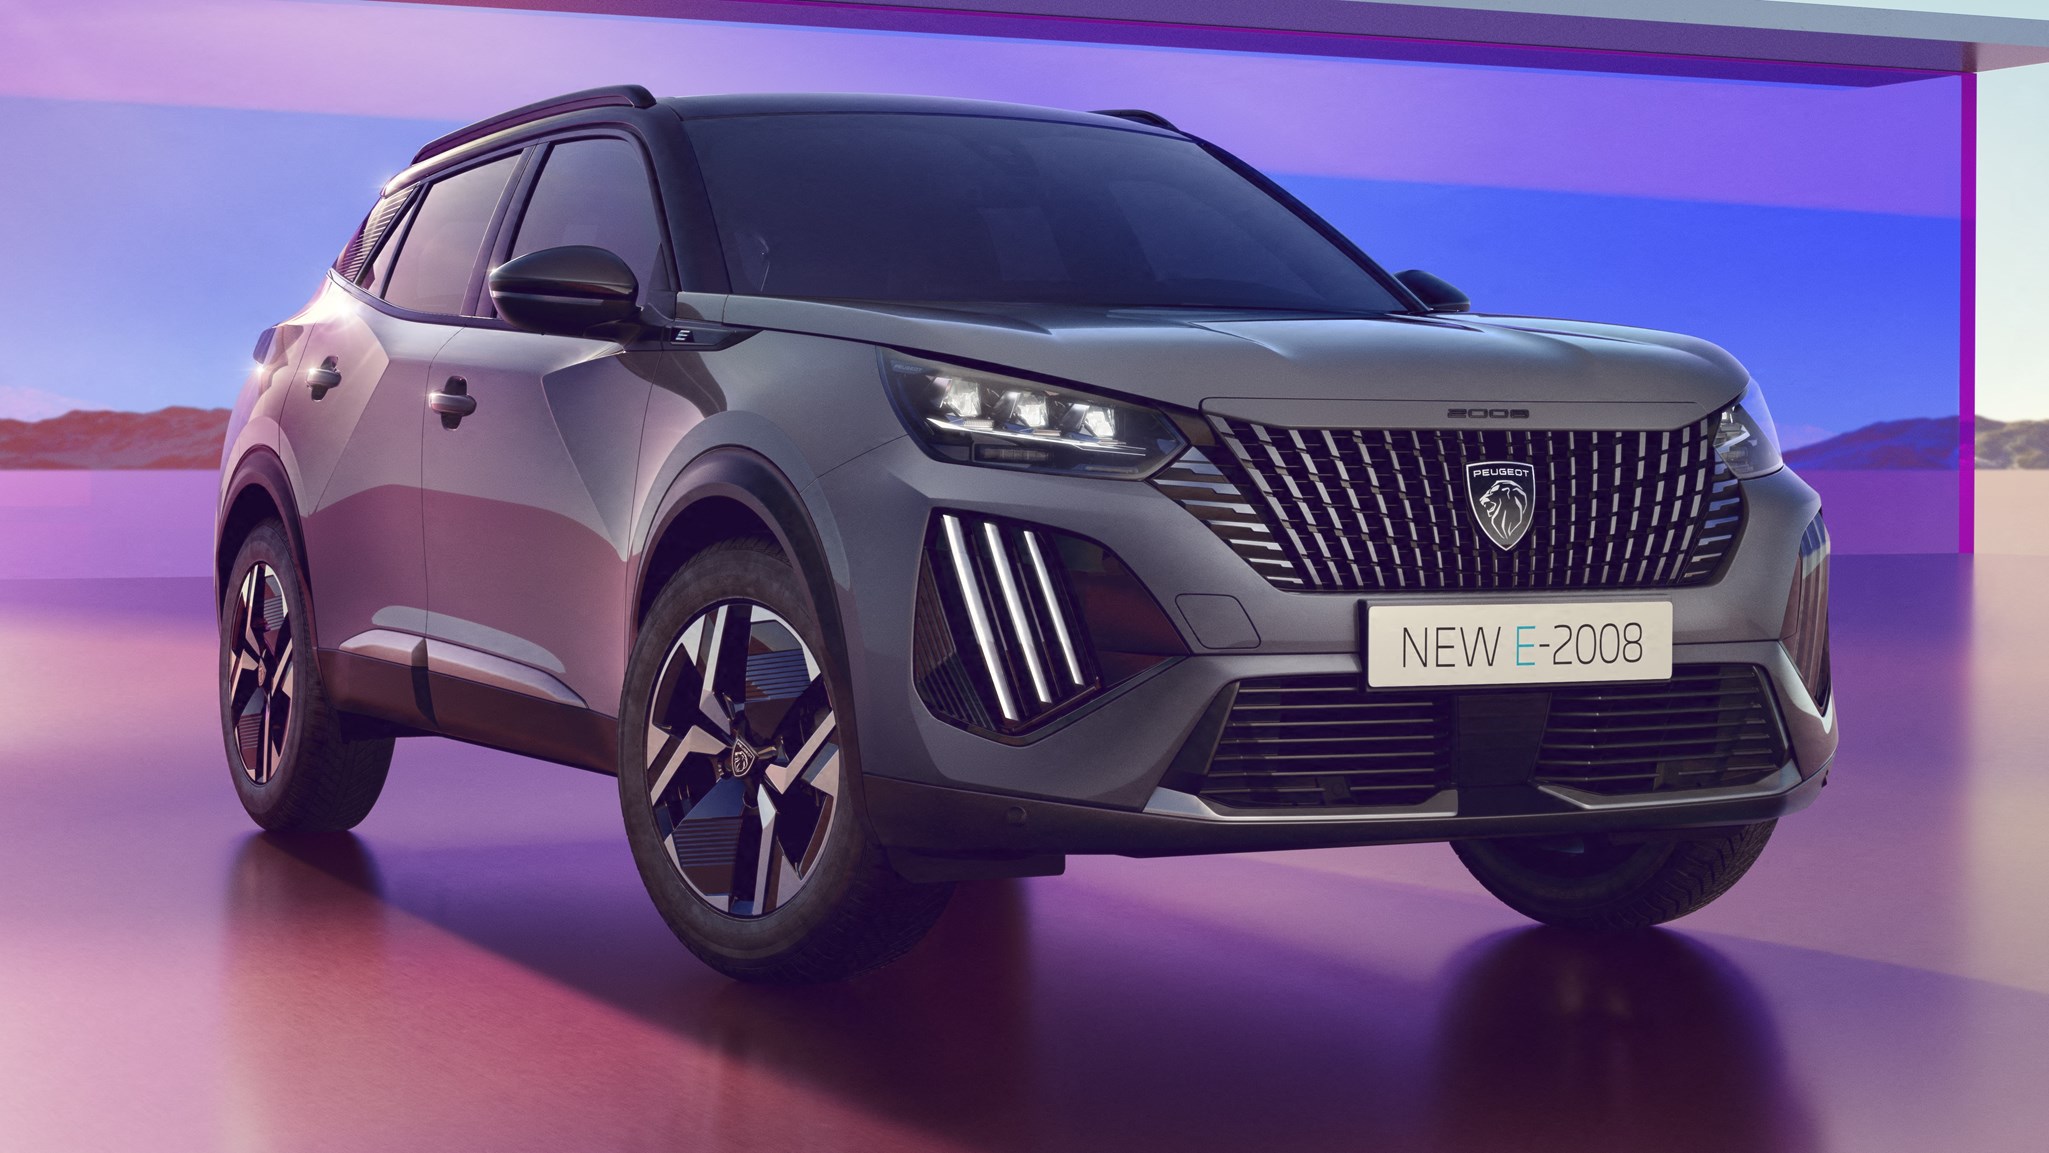 Peugeot 2008 and e-2008 arrive with sharp new look, first drive